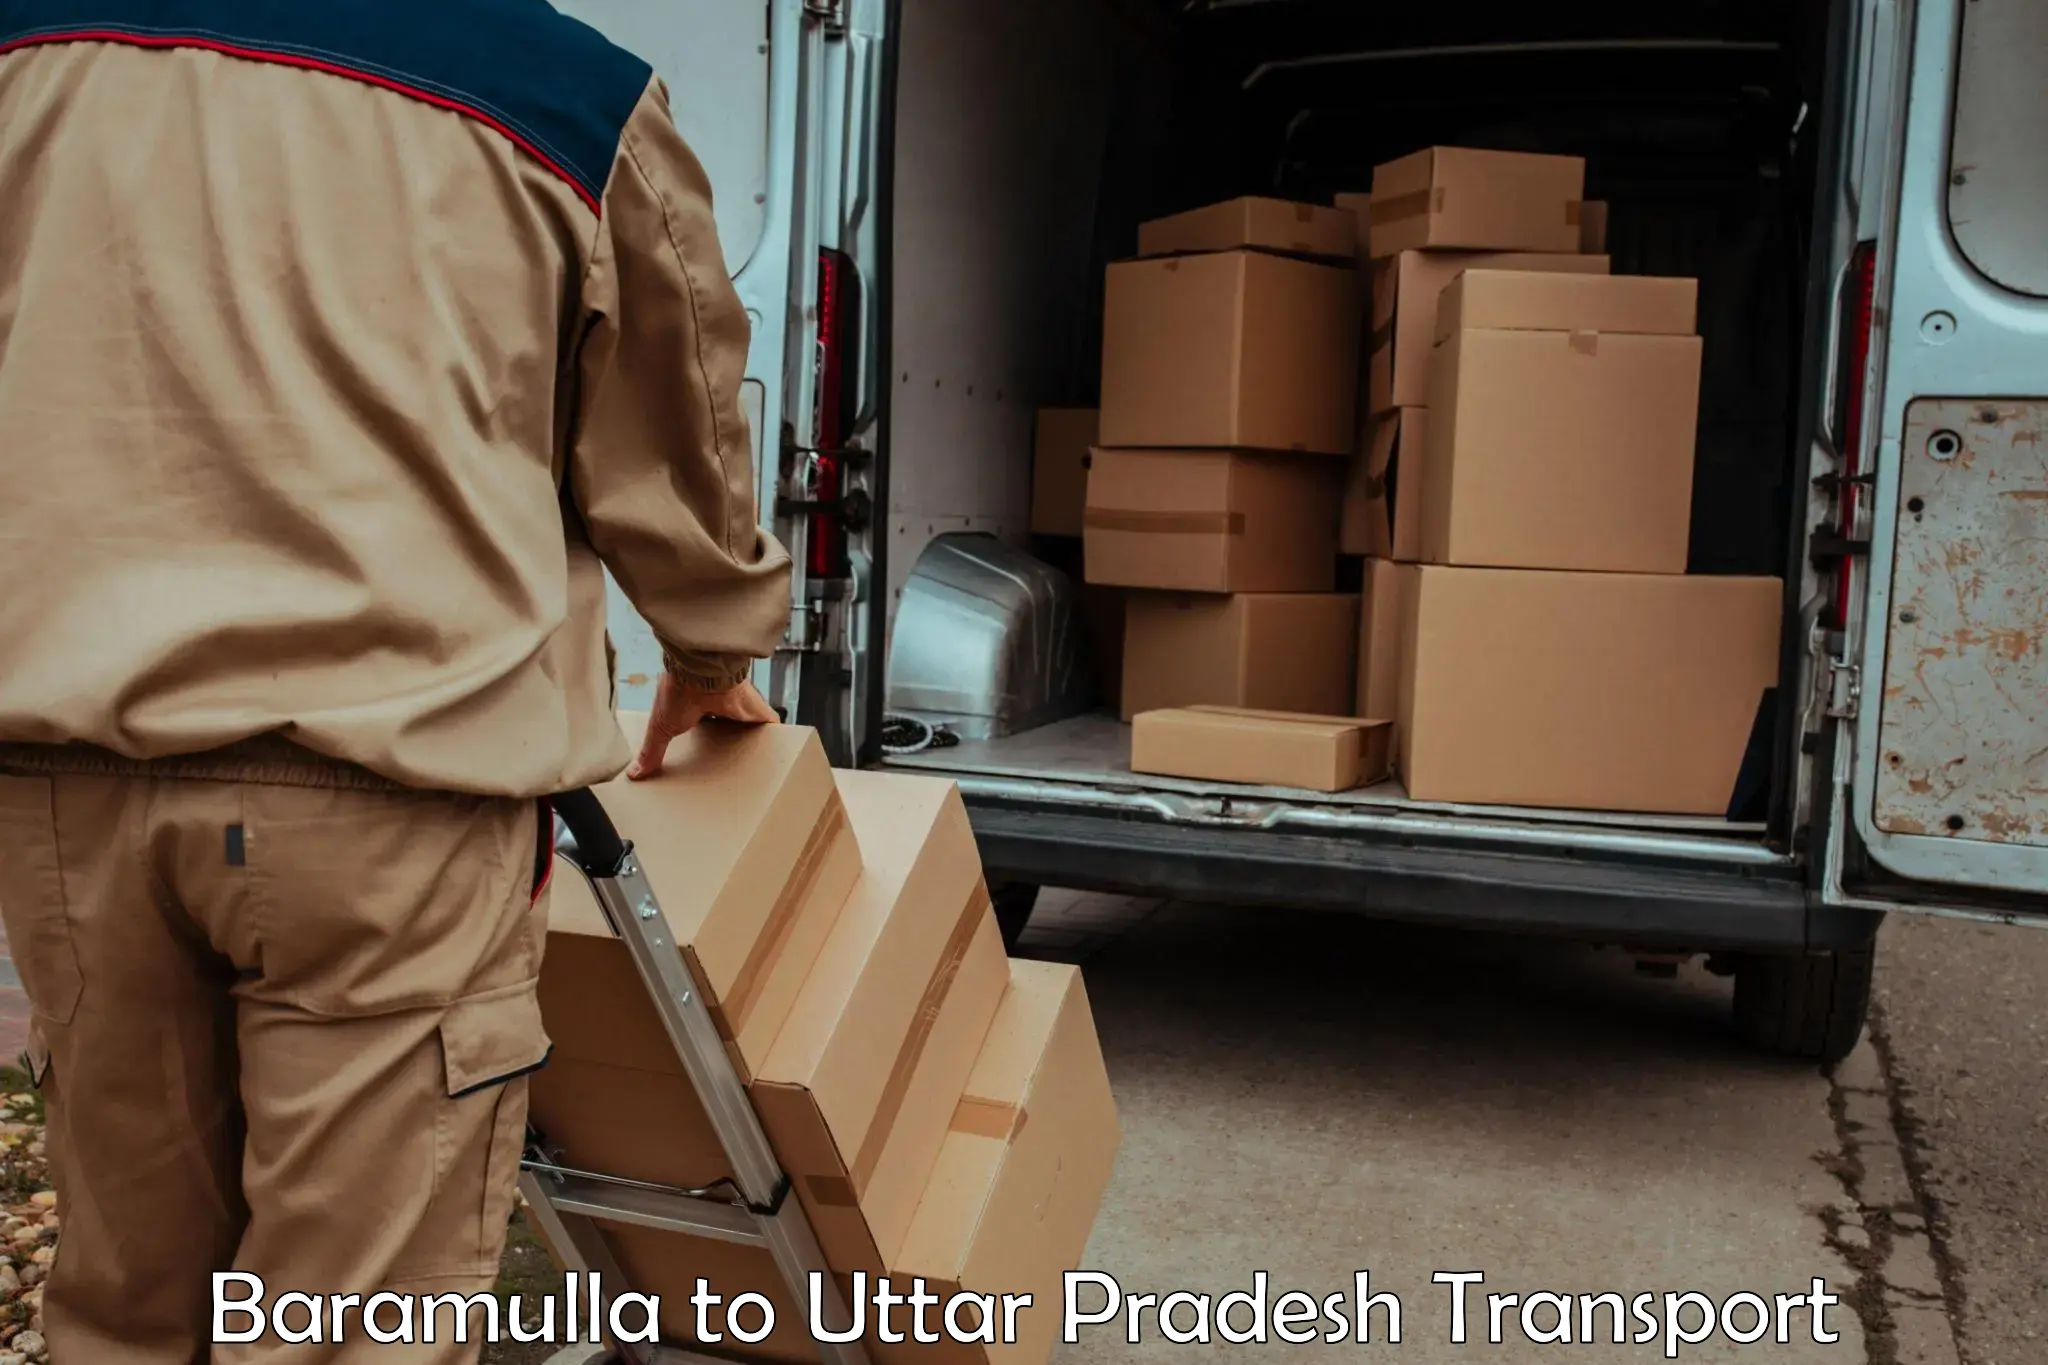 Truck transport companies in India Baramulla to IIIT Lucknow